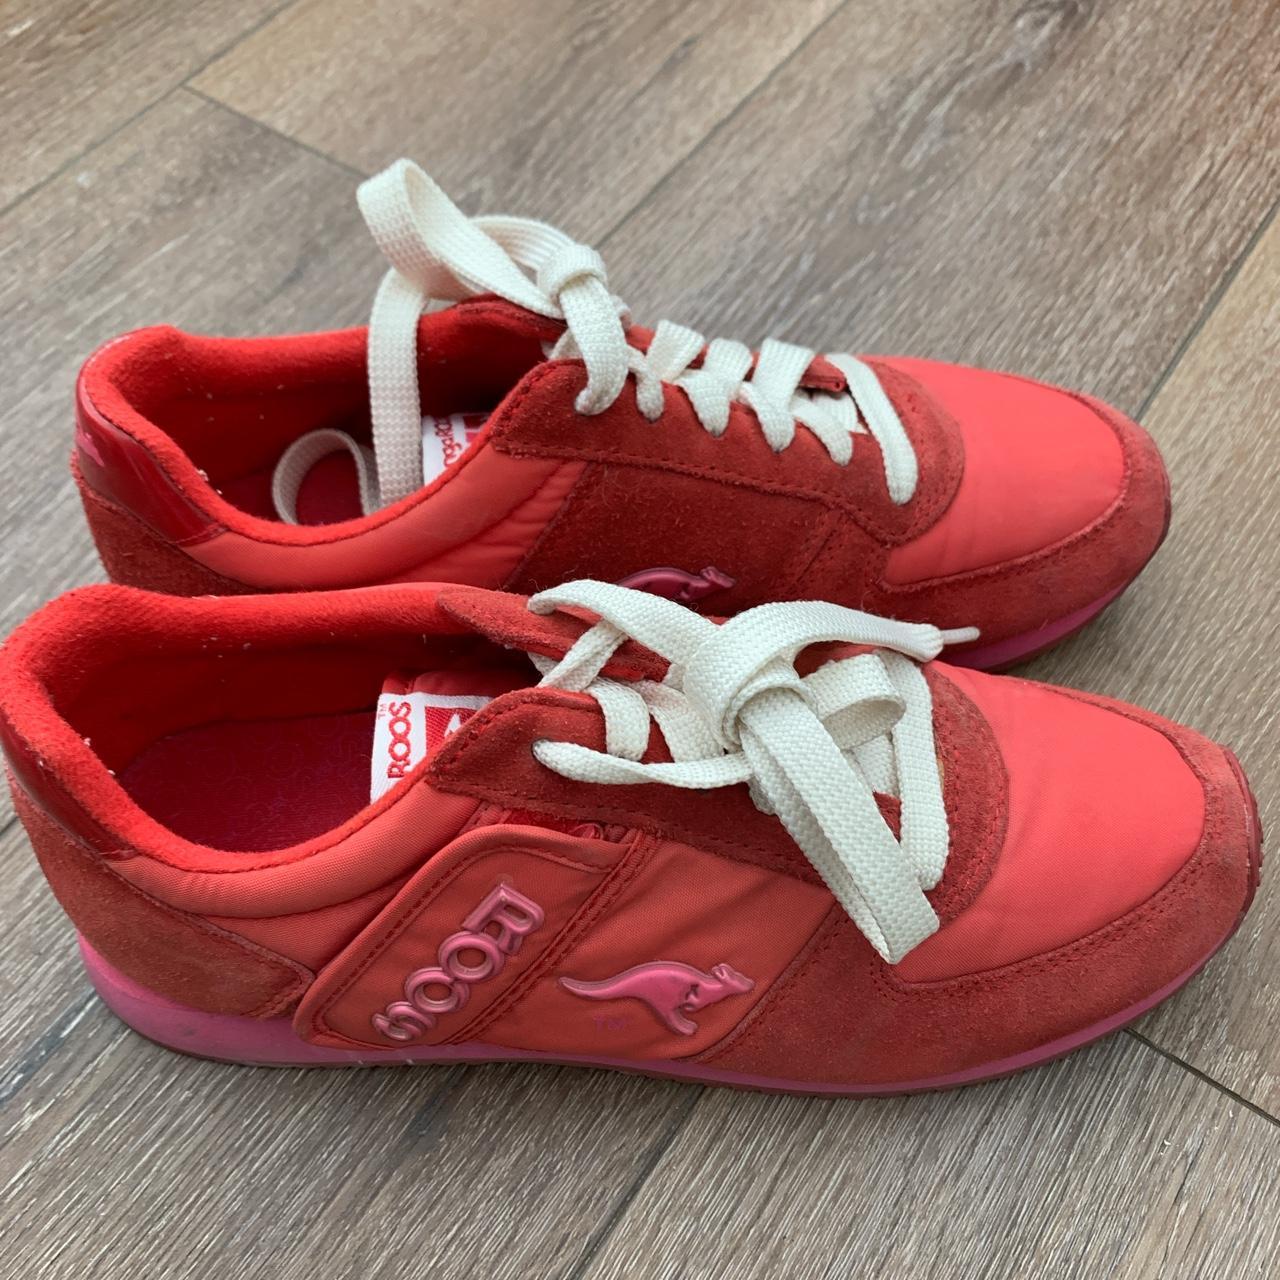 KangaROOS Women's Red and Pink Trainers (2)